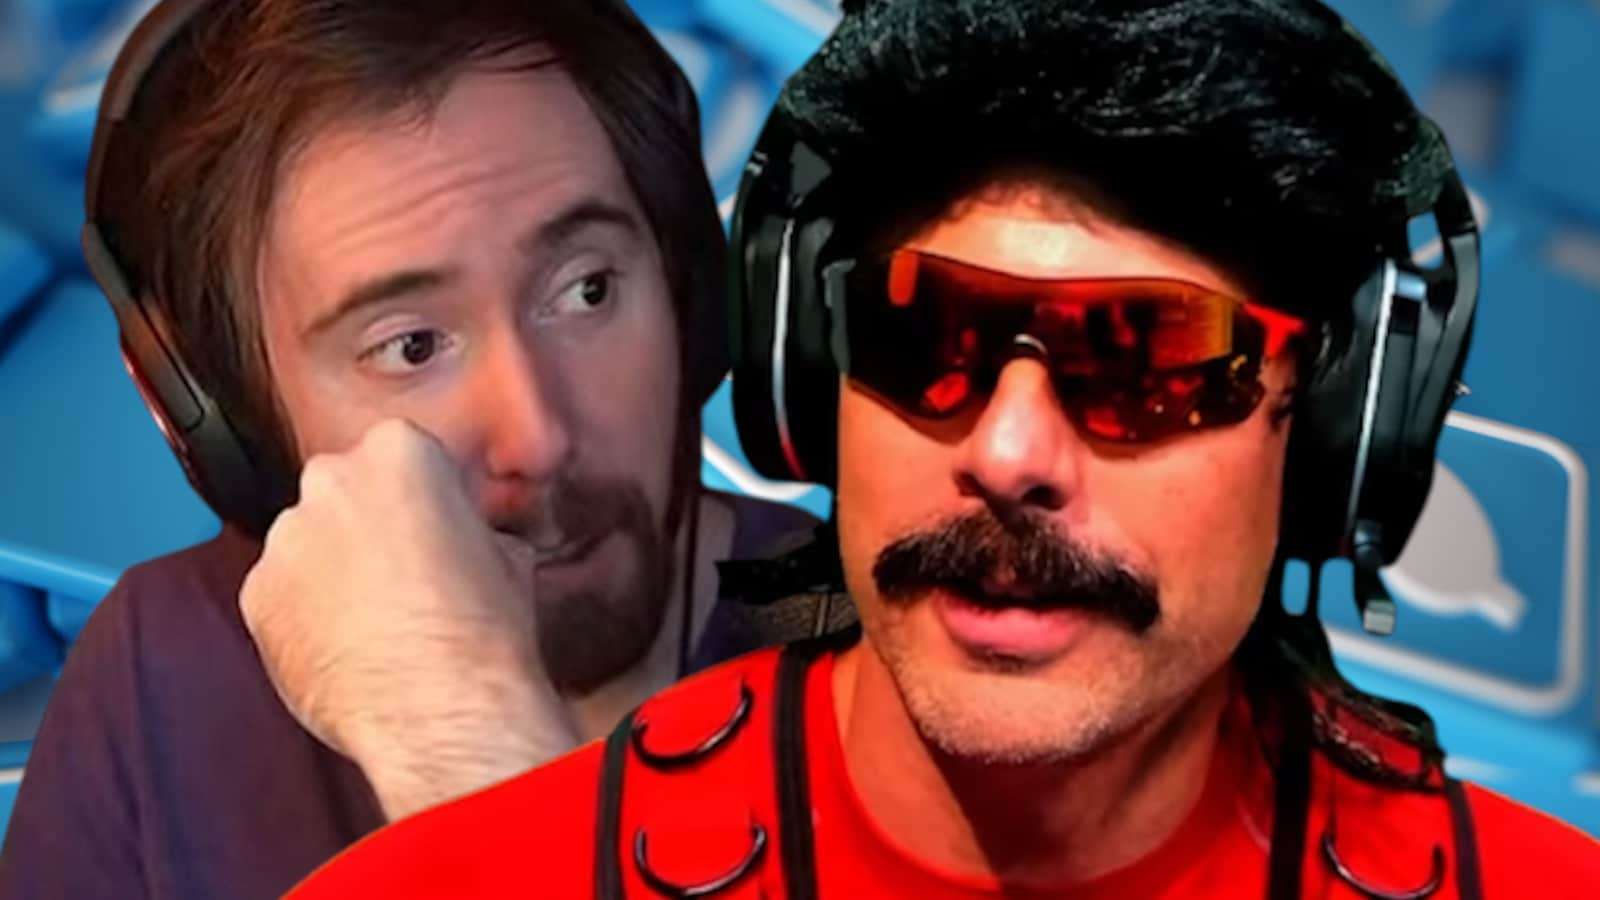 asmongold would get dr disrespect banned on twitter